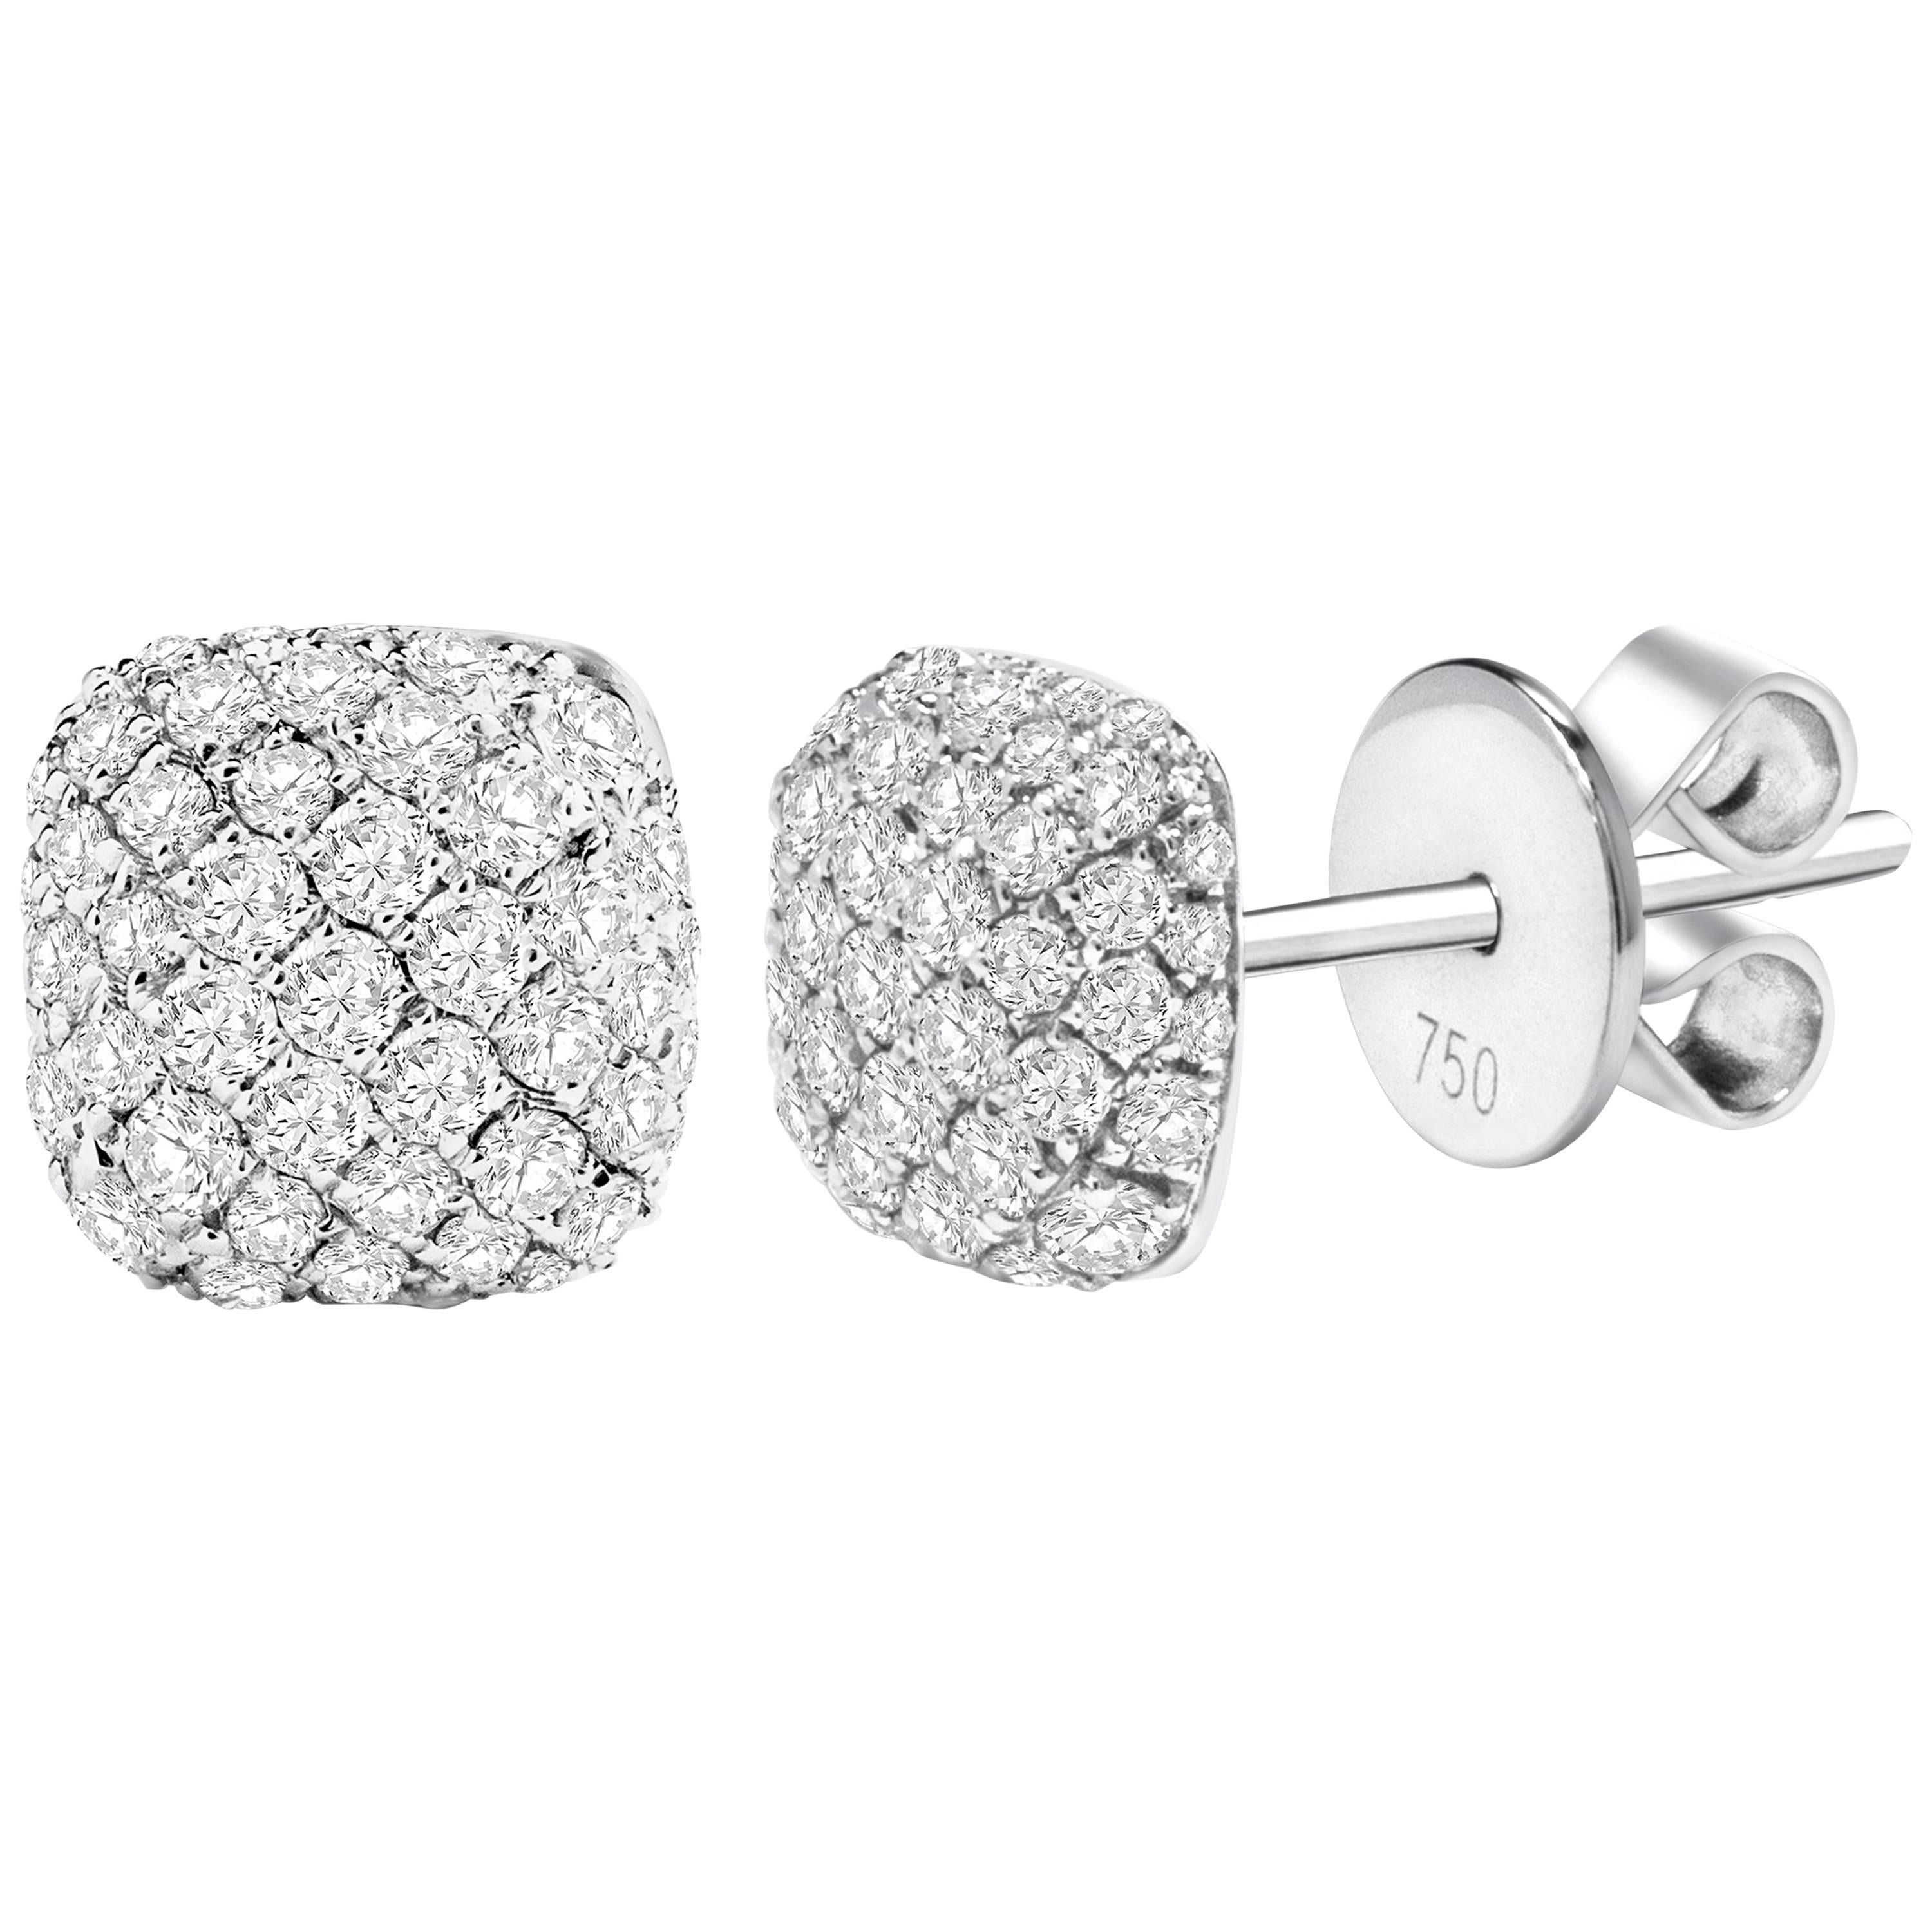 Showcasing a cluster of brilliant round diamonds pave set in a cushion shape stud earrings. Diamonds weigh 0.90 carats total, Made in 18k white gold. 

Style available in different price ranges. Prices are based on your selection. Please contact us